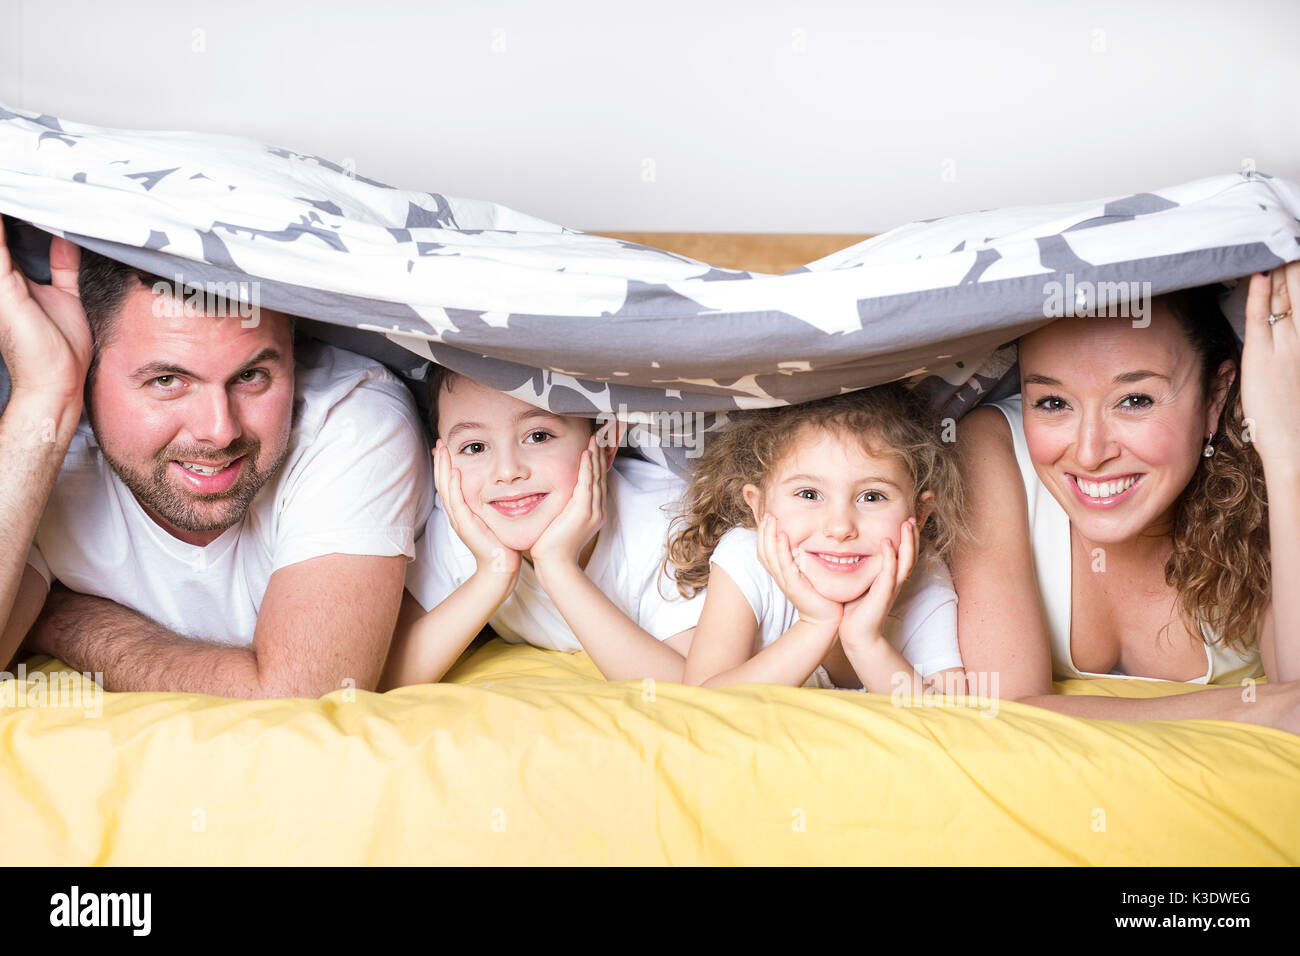 family, children and home concept - happy family with two kids under blanket at home Stock Photo